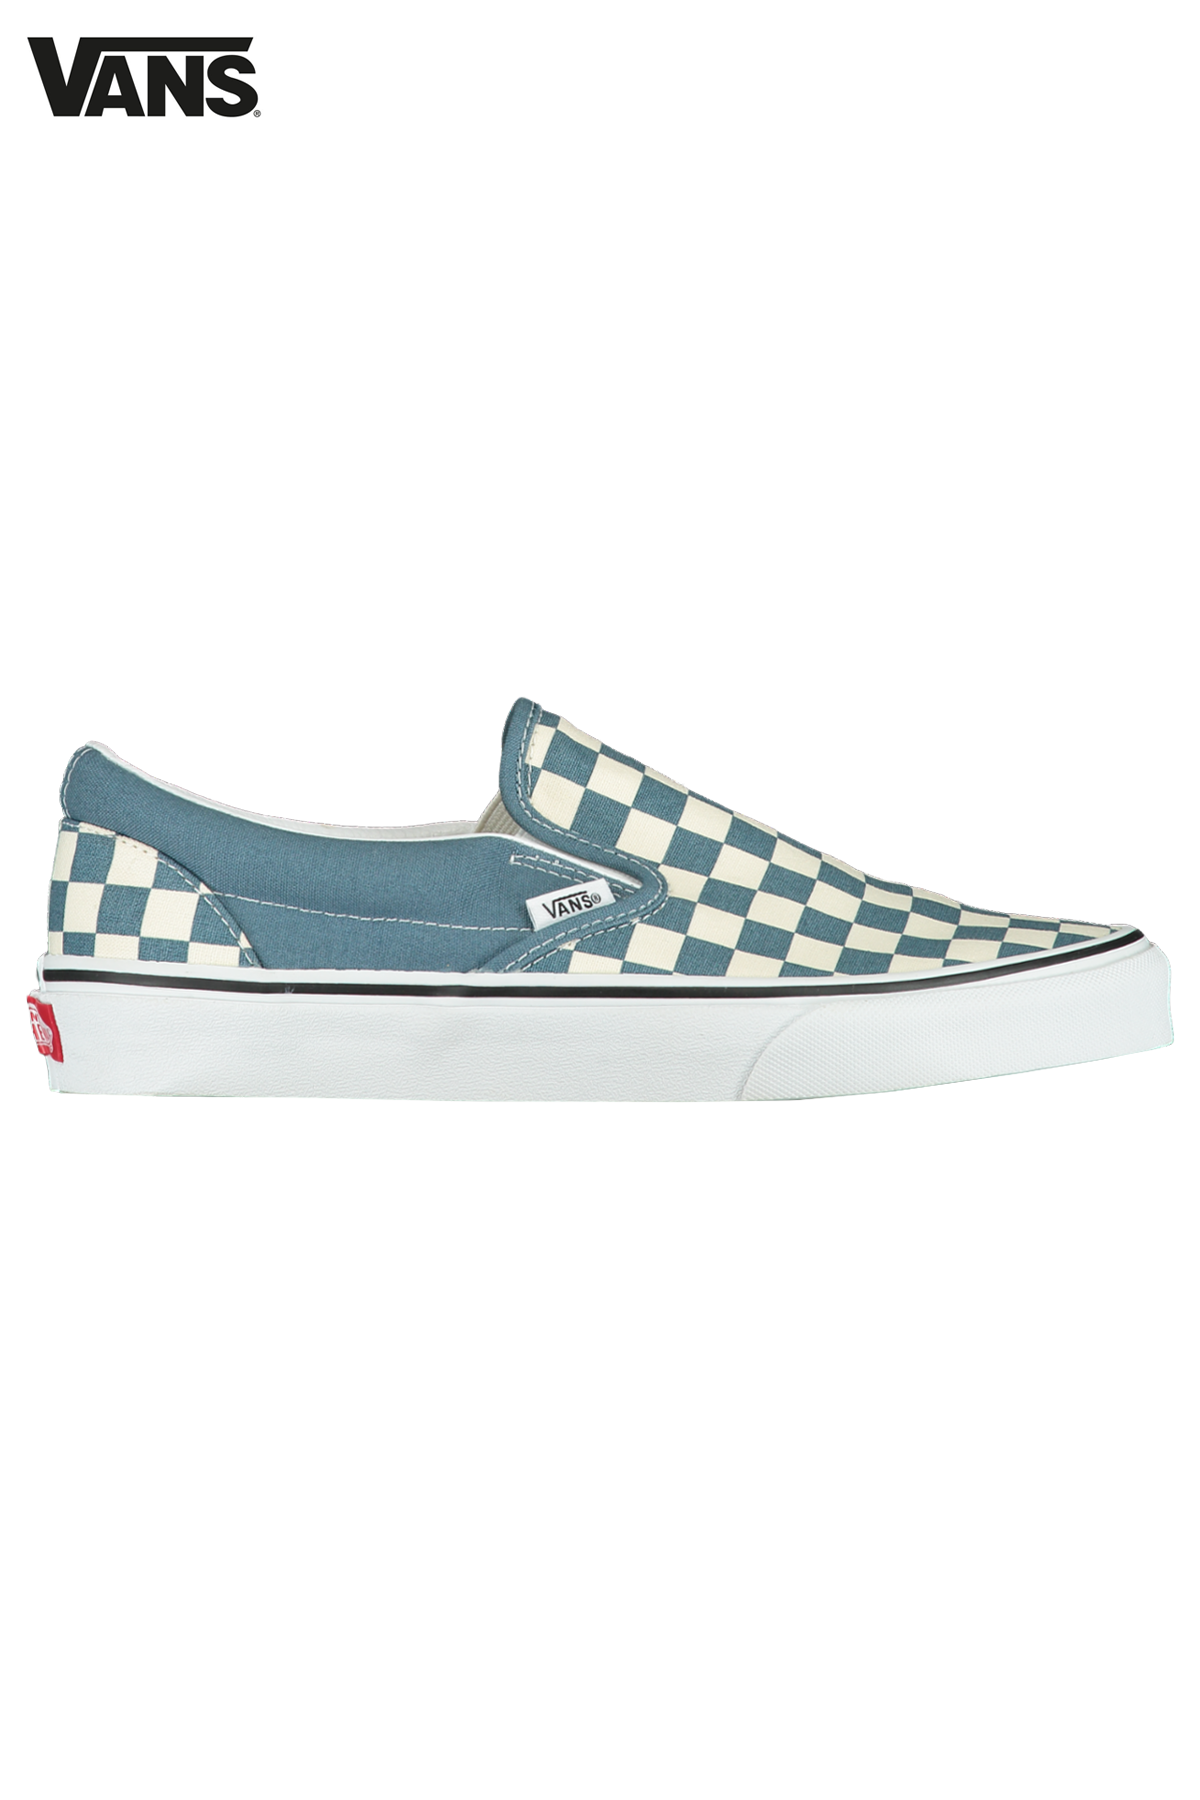 vans classic slip on damier, magnanimous disposition UP TO 86% OFF -  www.aimilpharmaceuticals.com